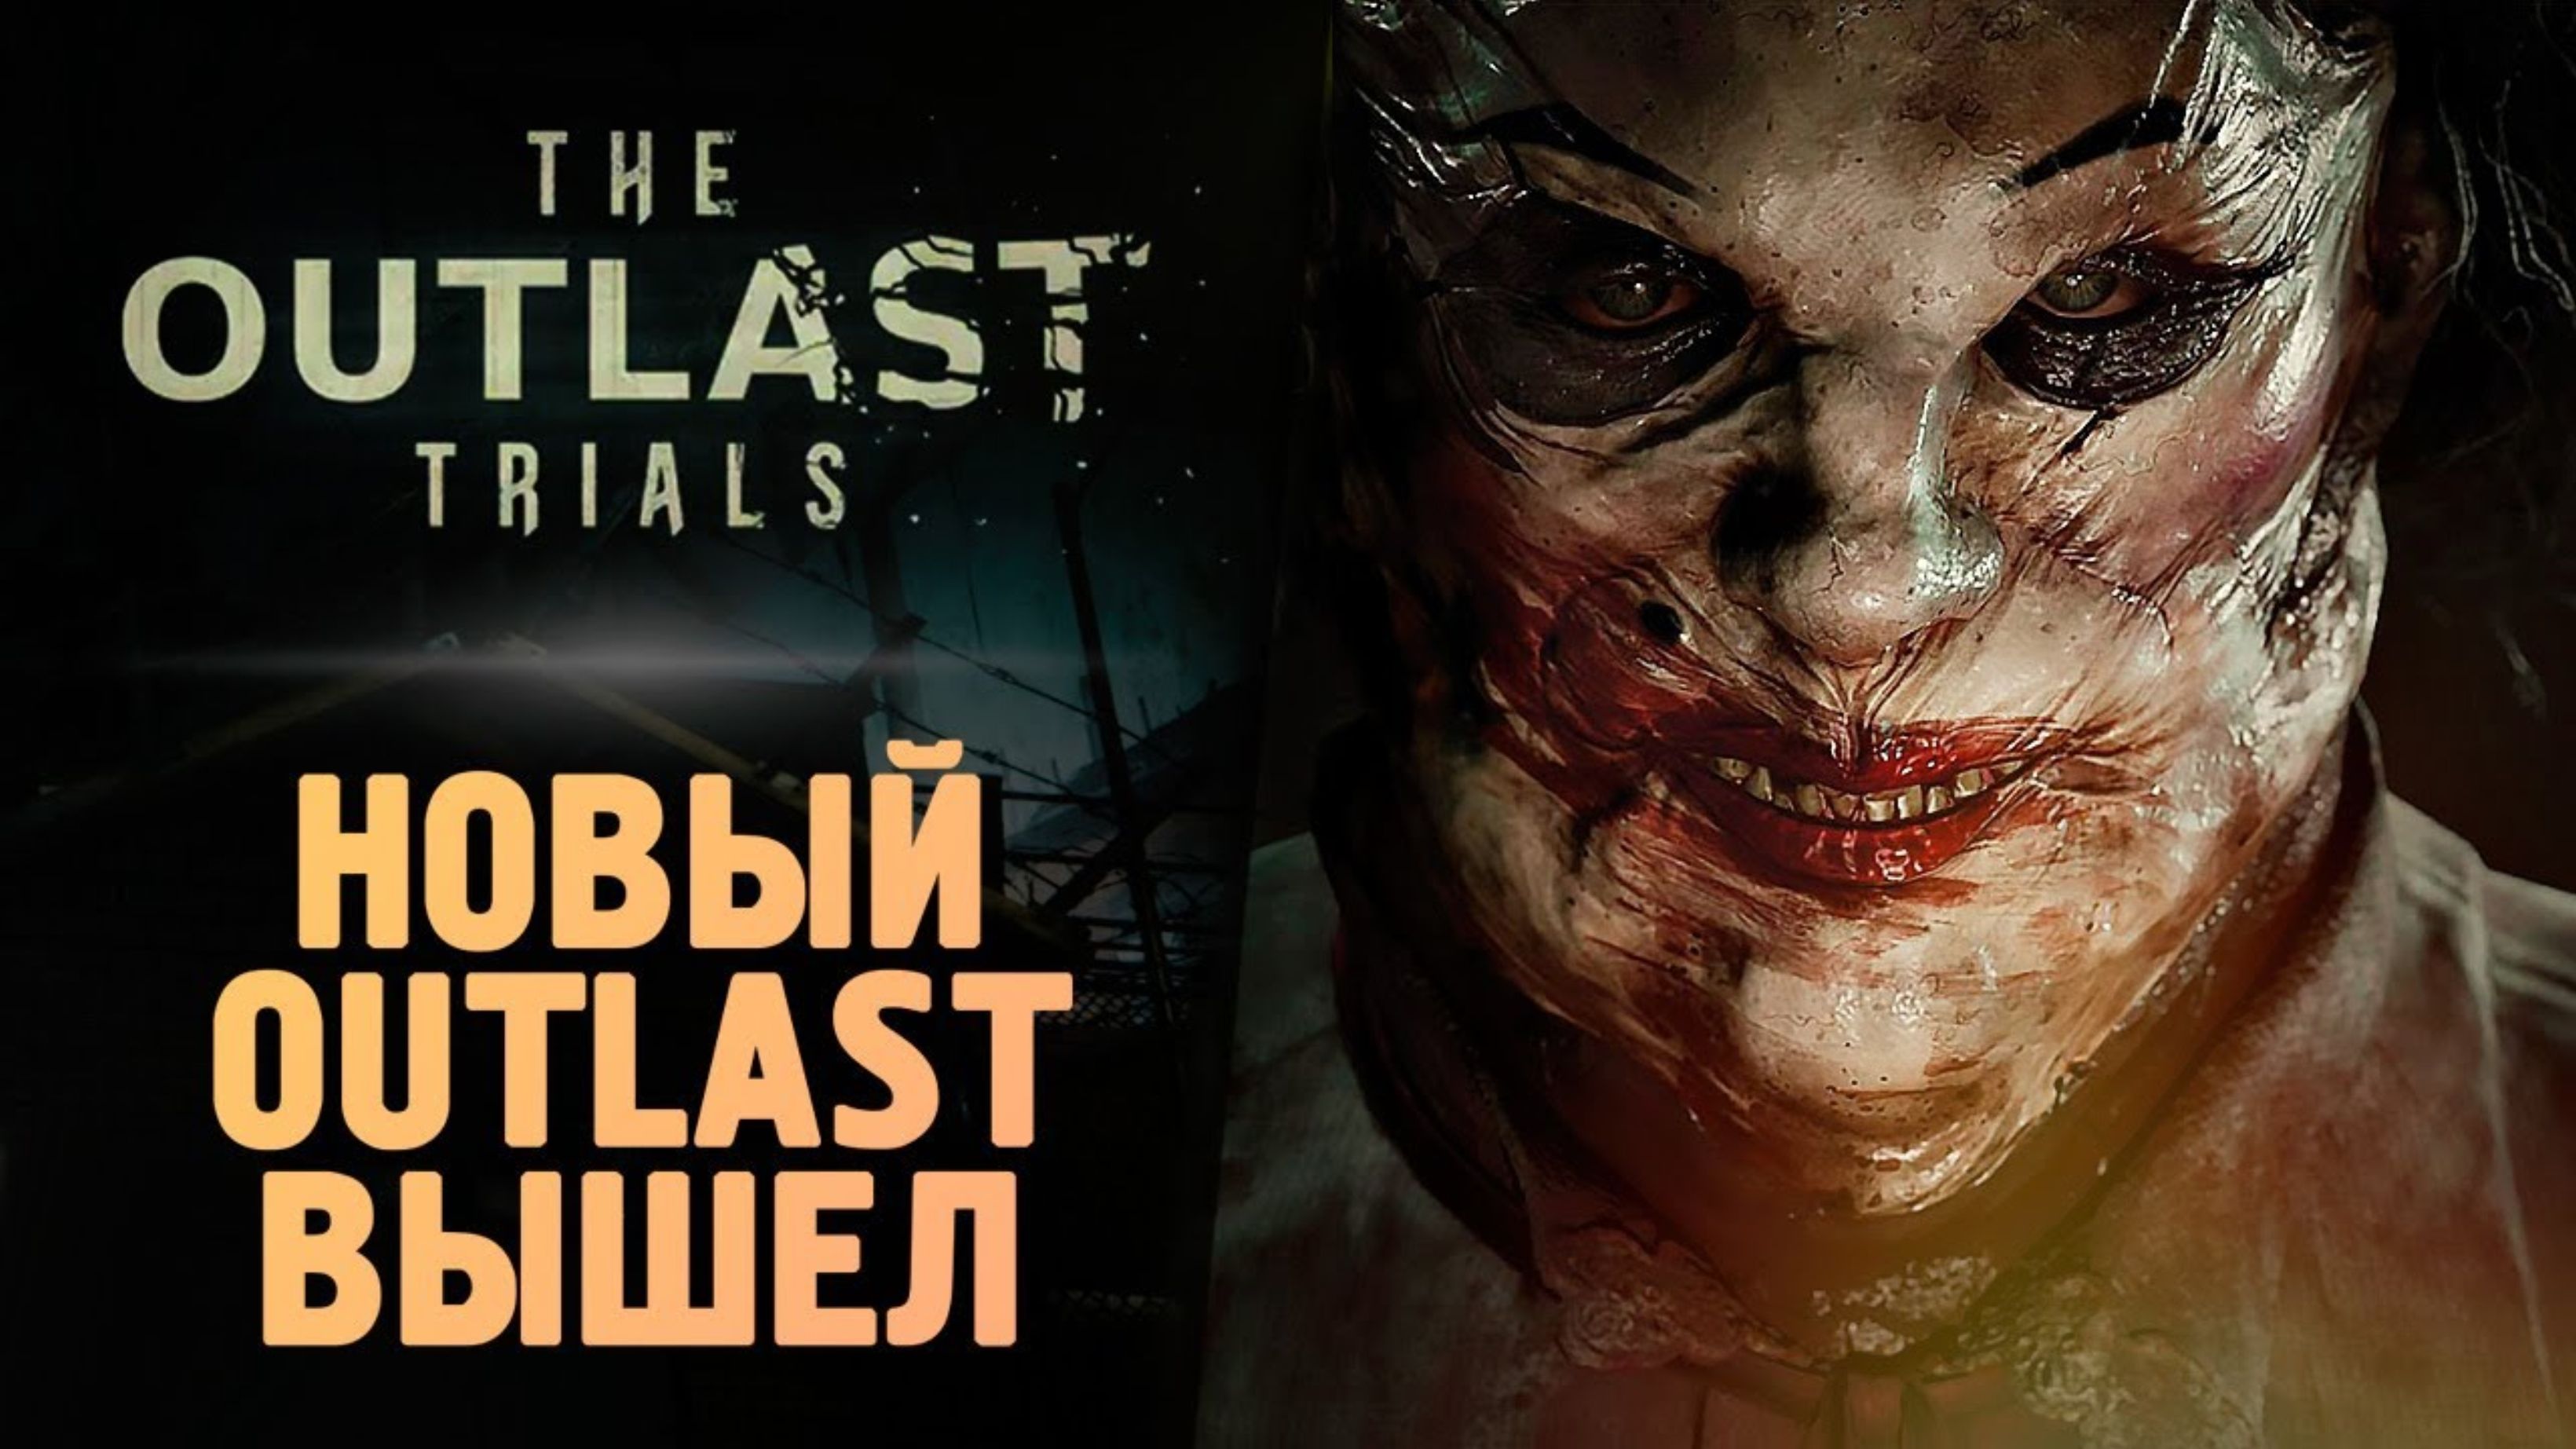 OUTLAST 3 - The Outlast Trials